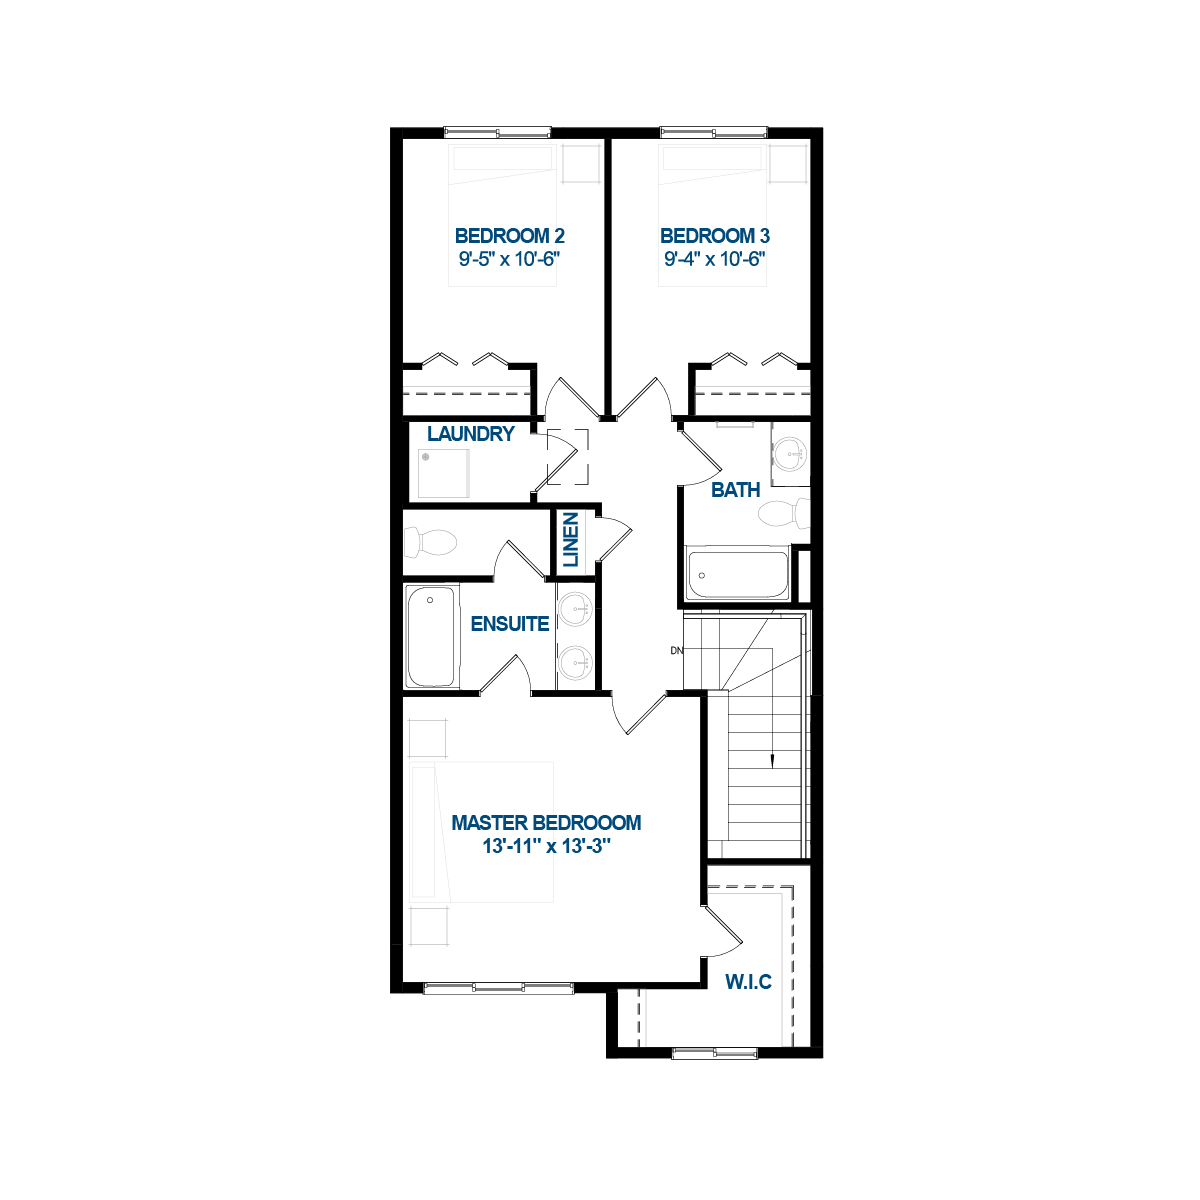  3771 Erlanger Drive NW  Floor Plan of Edgemont with undefined beds